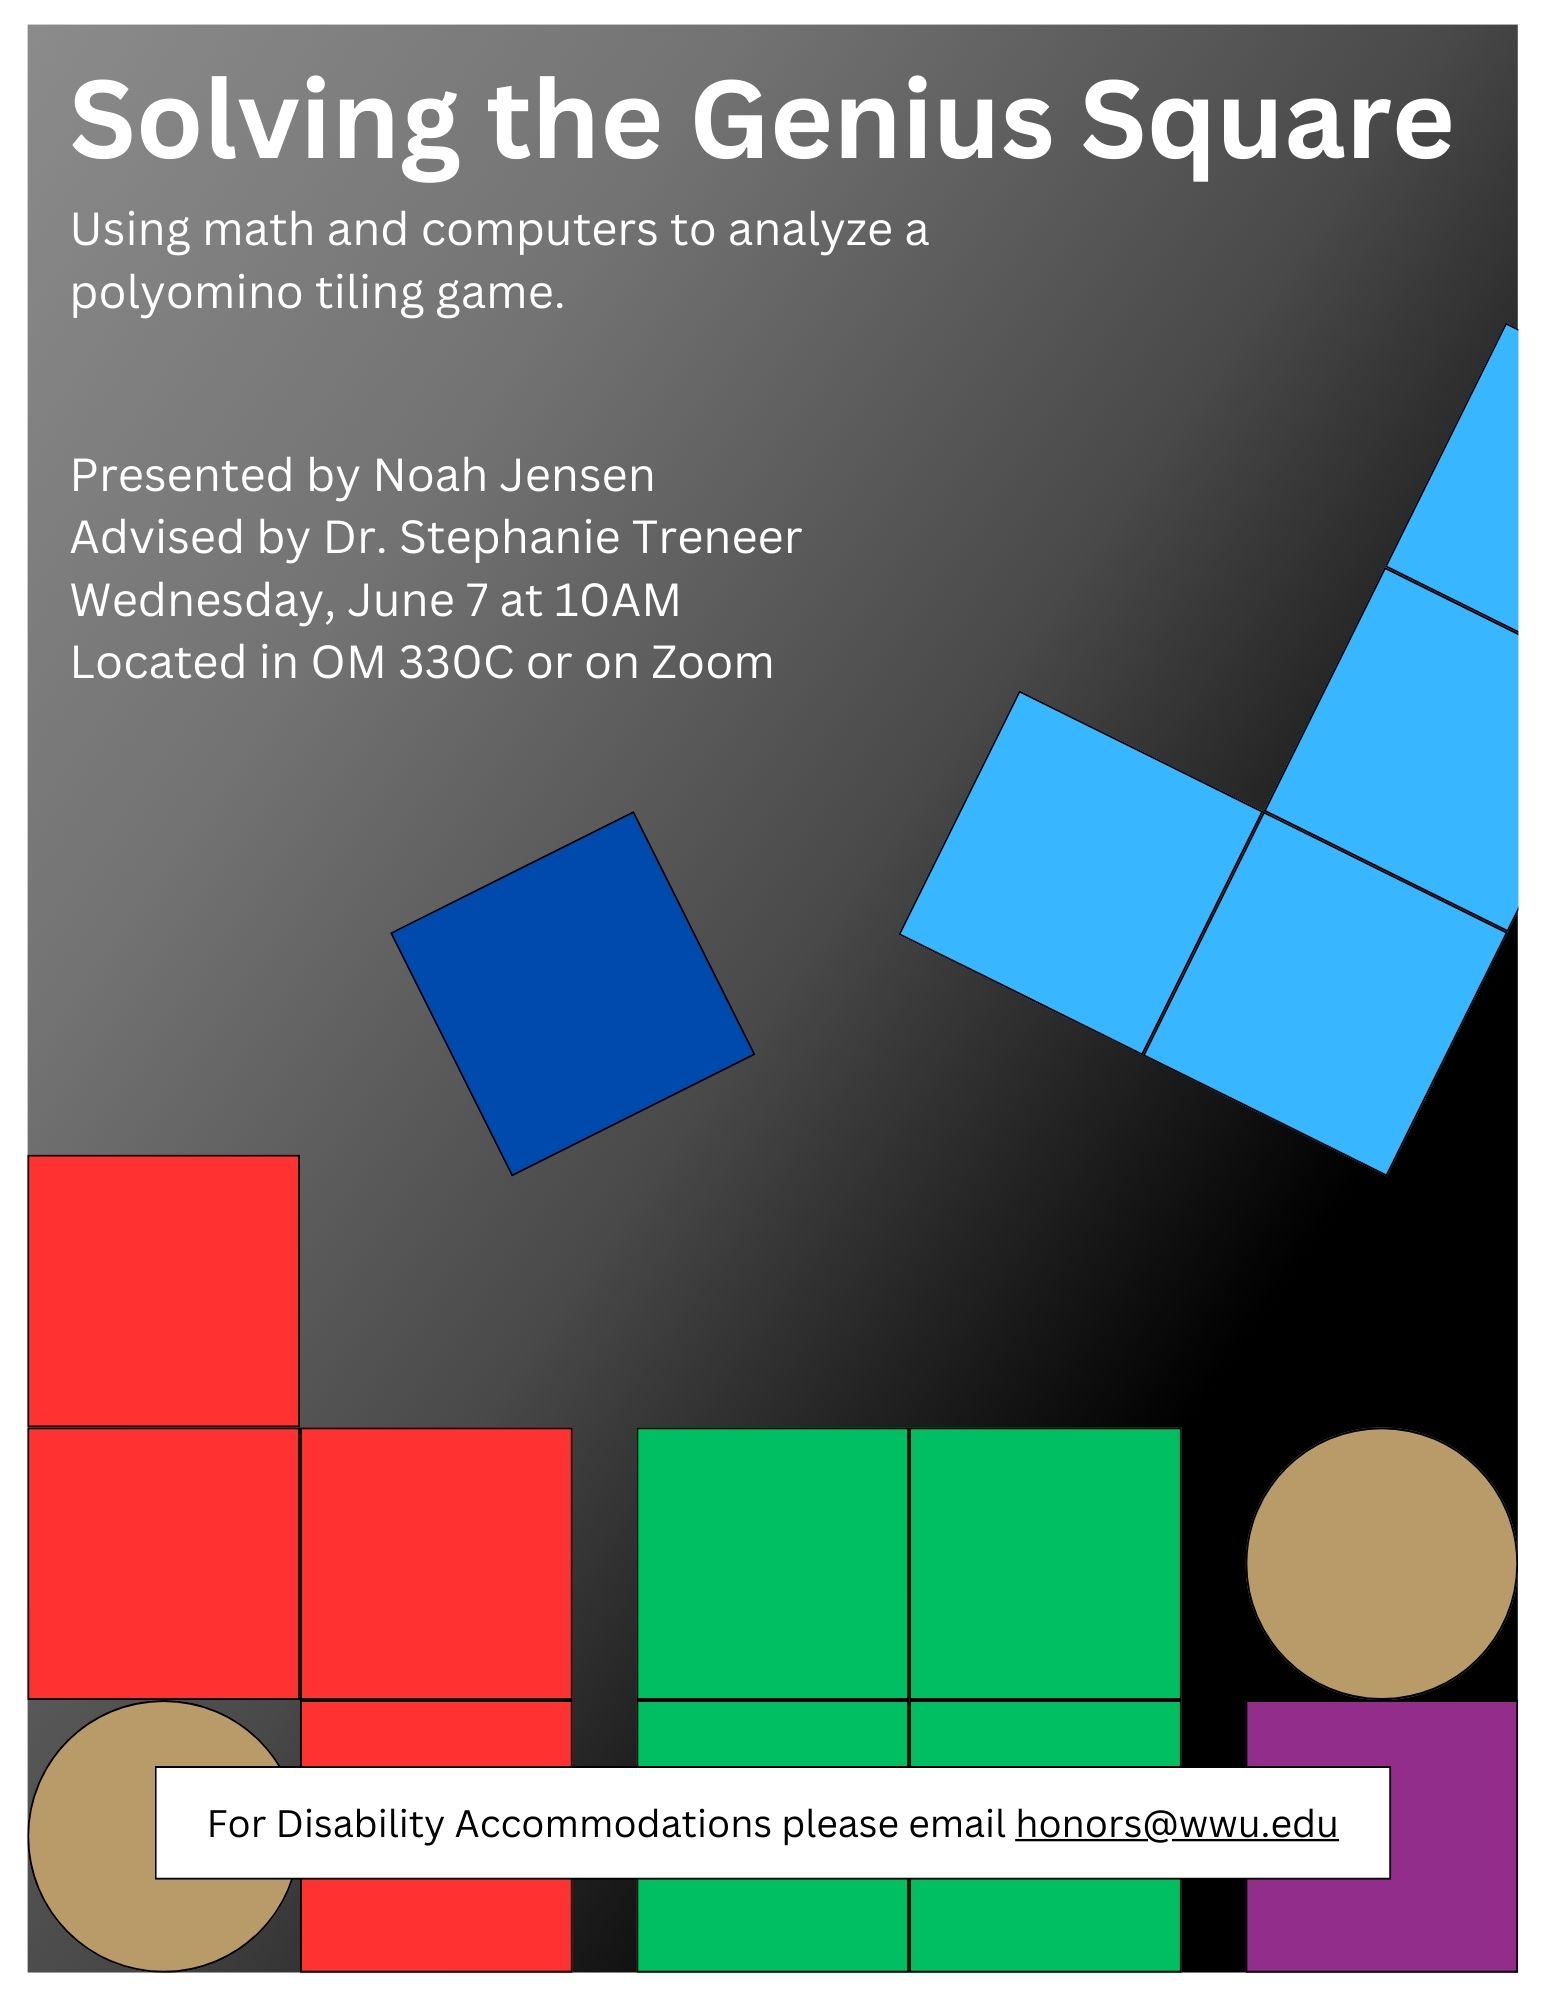 A white to black gradient poster. There are two light brown circles in the bottom left and right. Next to these circles are red, dark blue, light blue, green, or purple shapes made of squares. Text reads: "Solving the Genius Square: Using math and computers to analyze a polyomino tiling game. Presented by Noah Jensen, Advised by Dr. Stephanie Treneer. Wednesday, June 7 at 10am. Located in OM 330C or on Zoom. For Disability Accommodations, please email honors@wwu.edu."